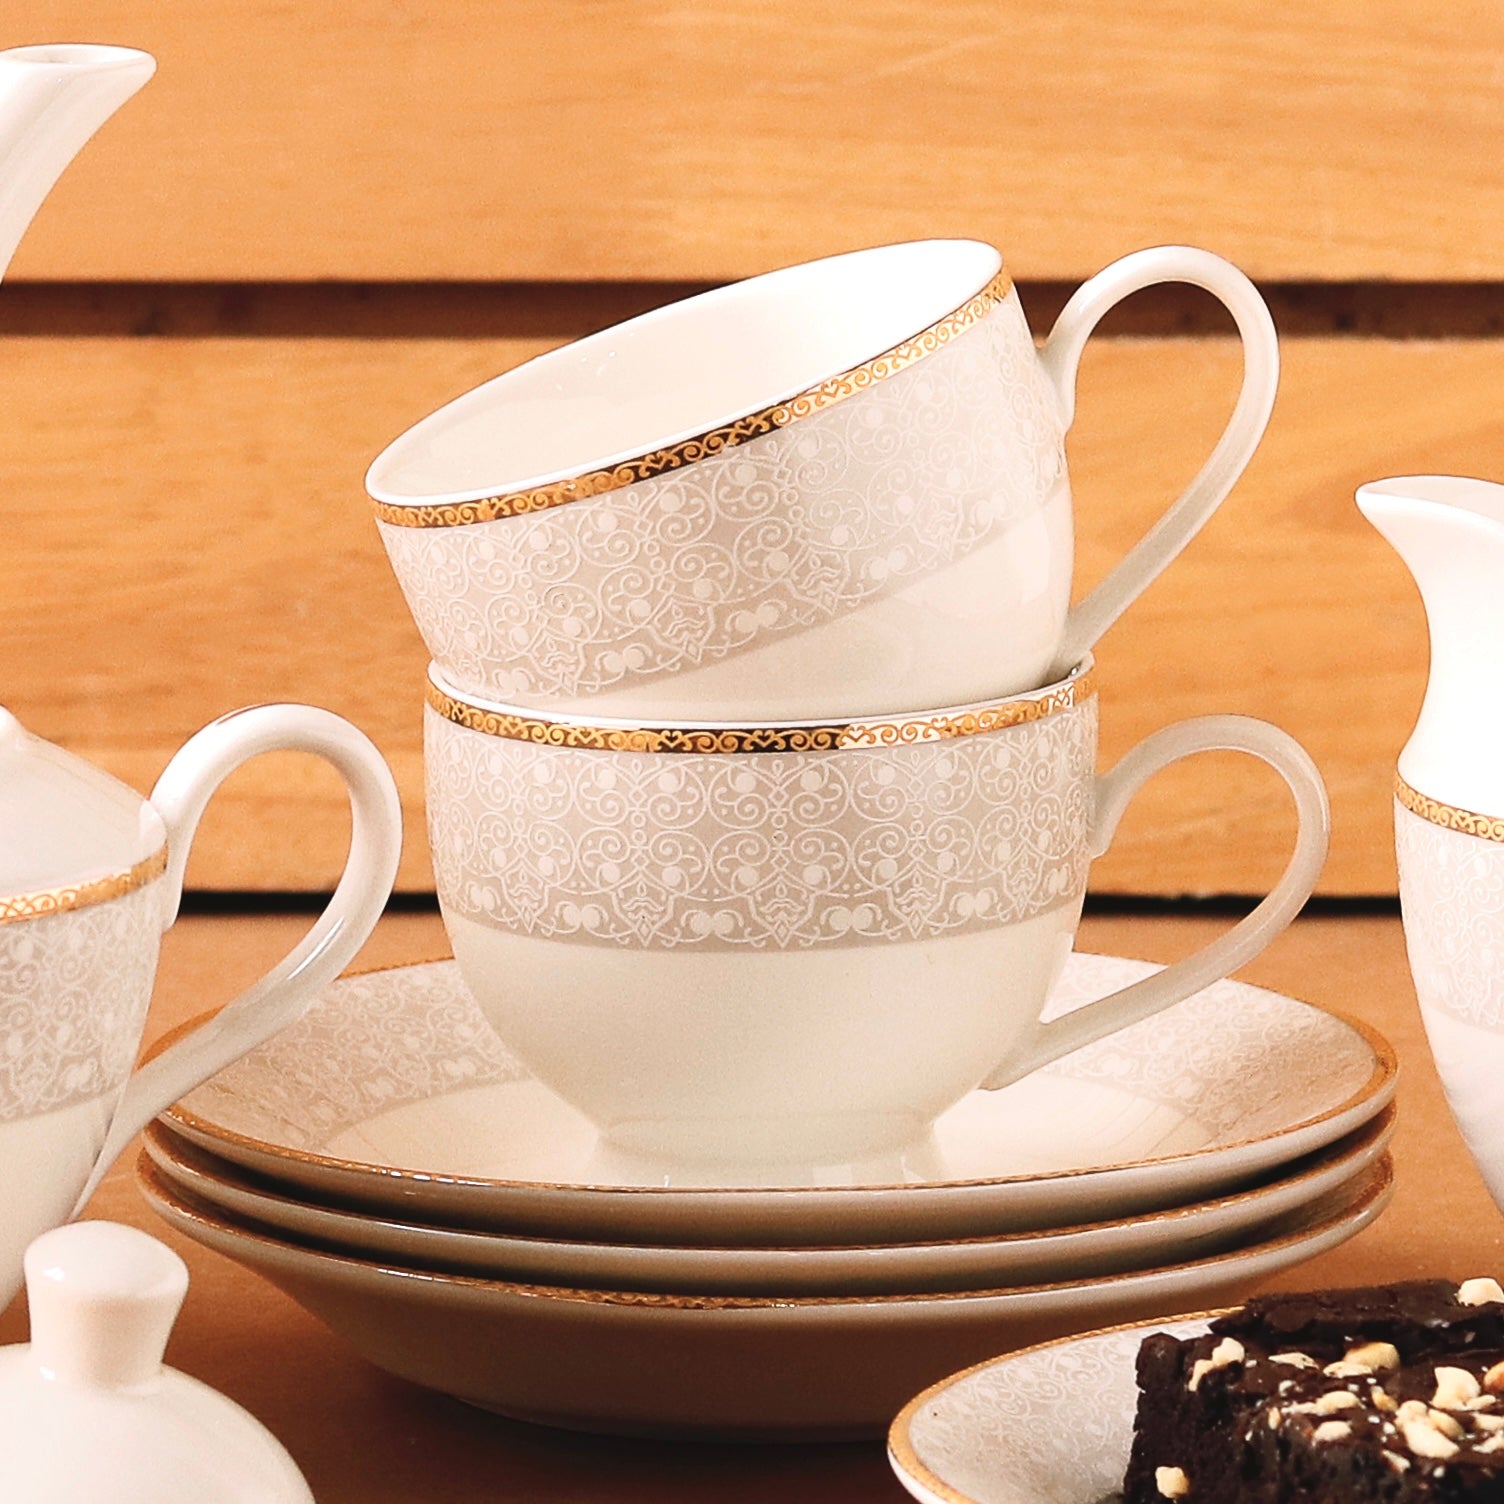 Embossed Vines Cup and Saucer Set (6 Cups and 6 Saucers) - Vigneto